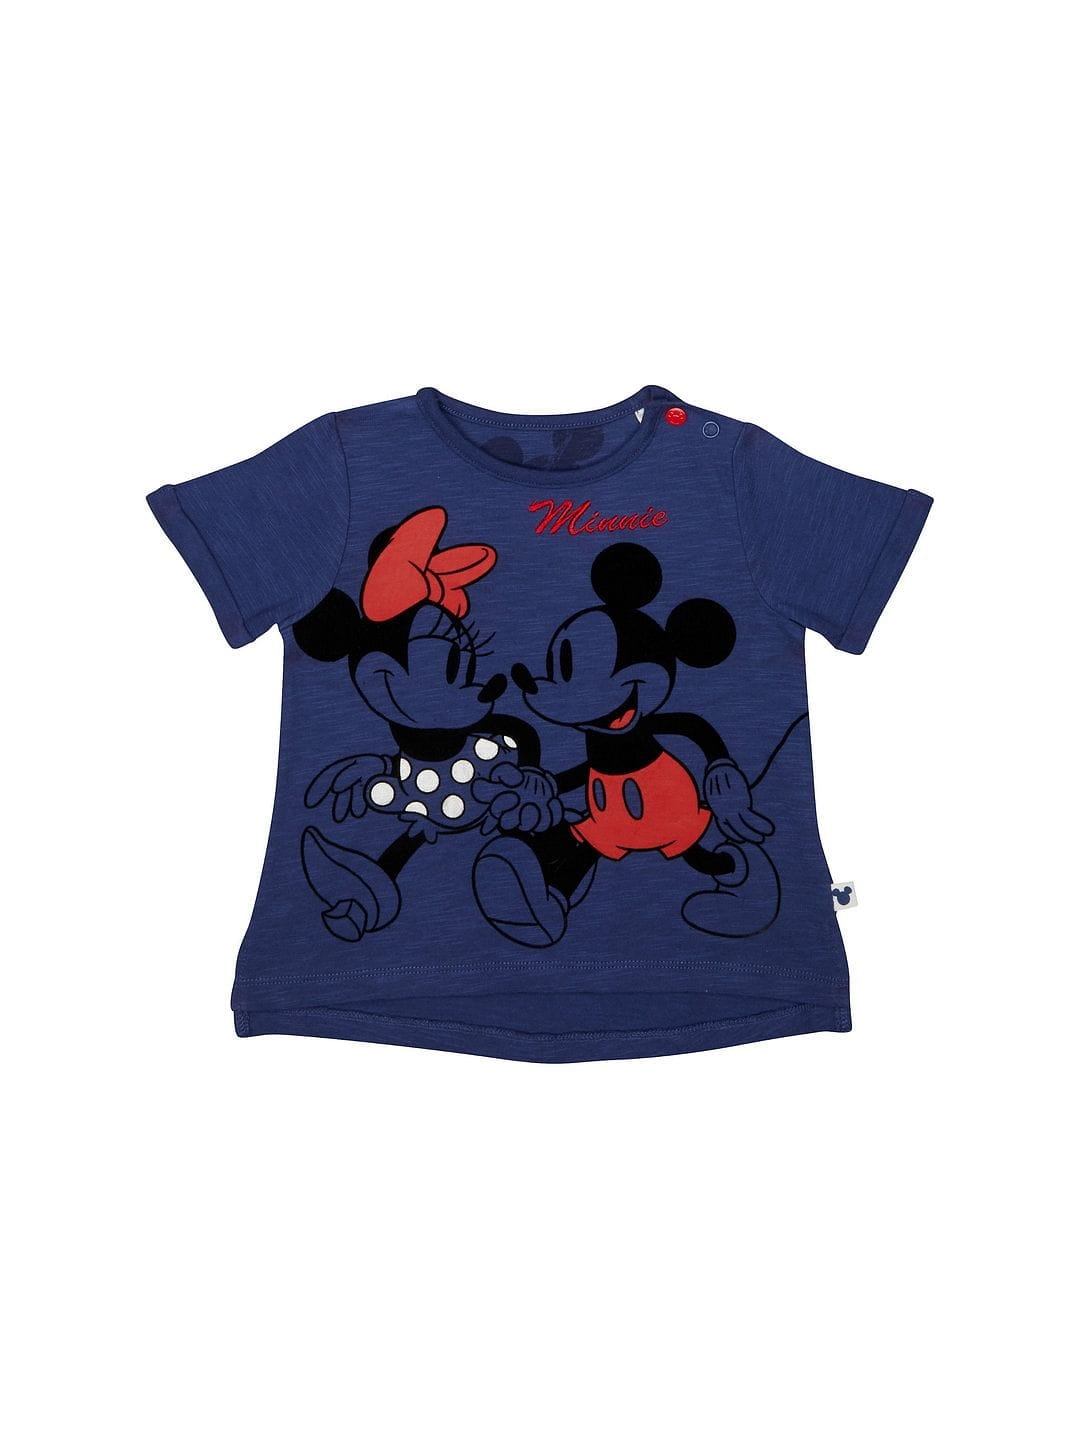 Mothercare | Disney Minnie And Mickey Navy T-Shirt 0